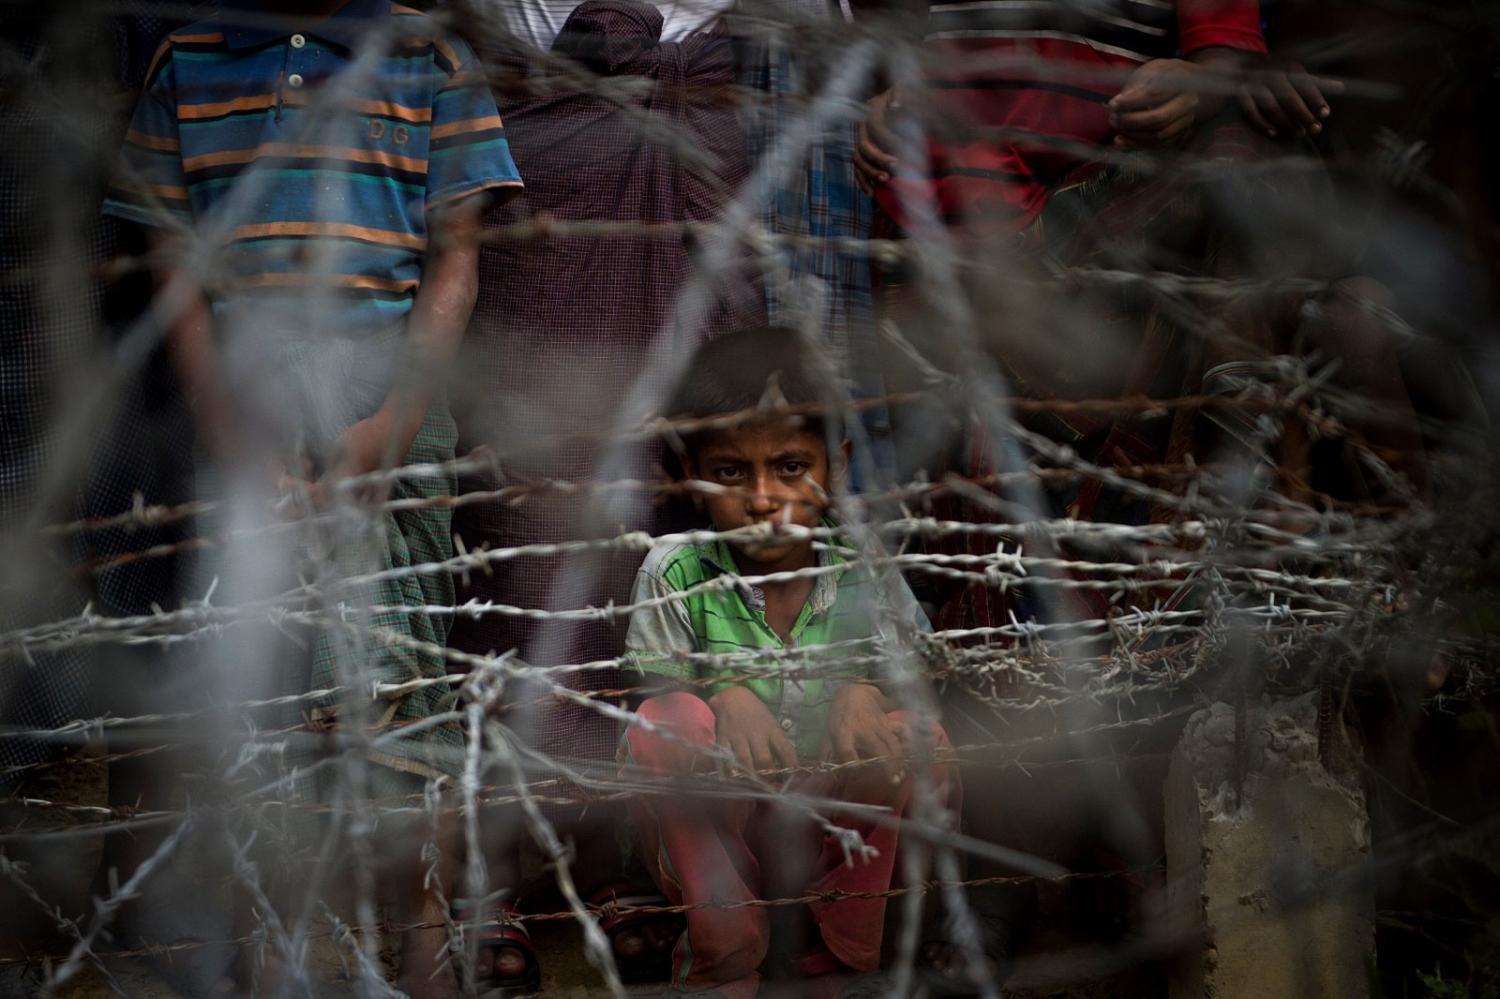 Rohingya refugees gather in “No Man's Land” on the Myanmar–Bangladesh border (Ye Aung Thu/AFP via Getty Images)